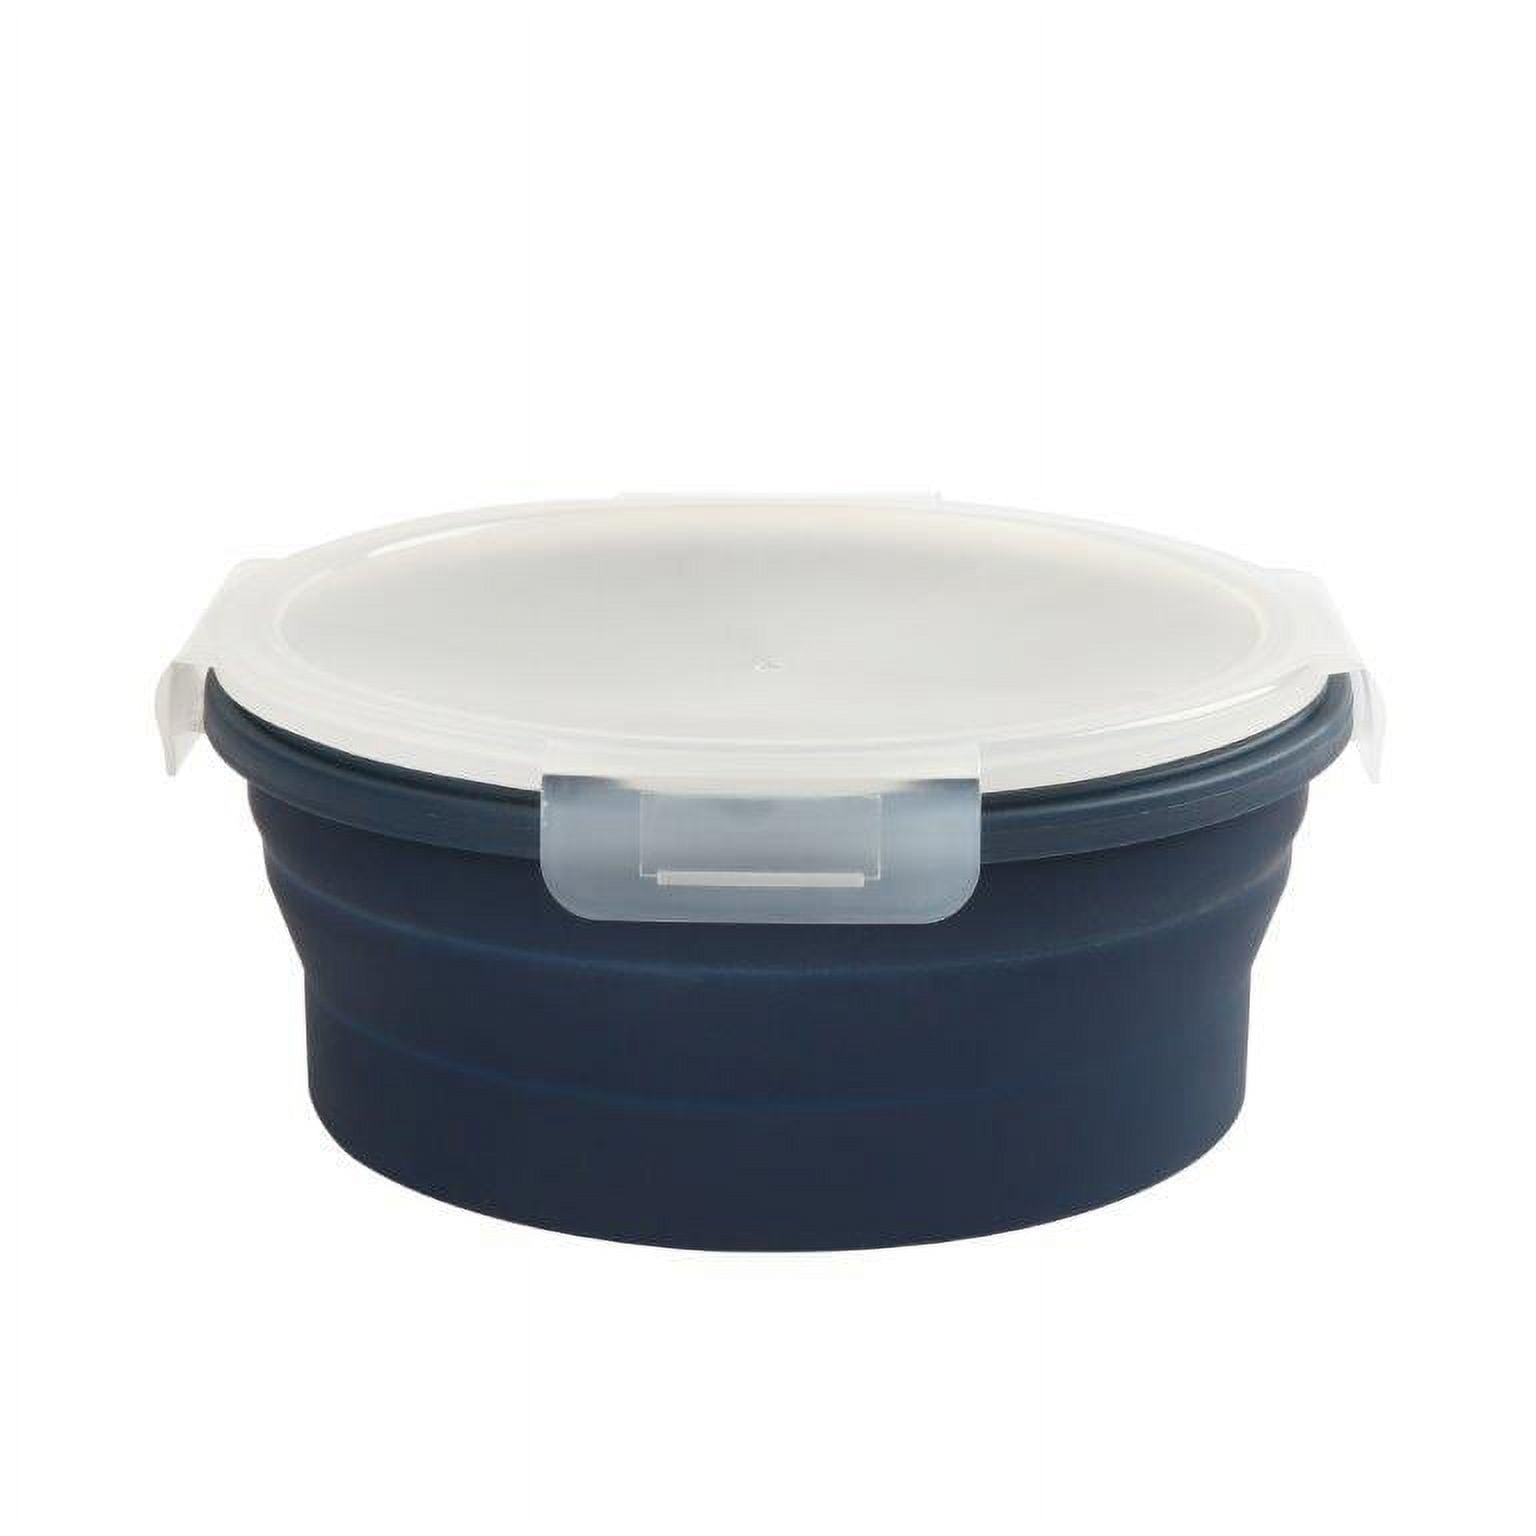 Oake 2-Pk. Collapsible Food Storage Containers, Created for Macy's